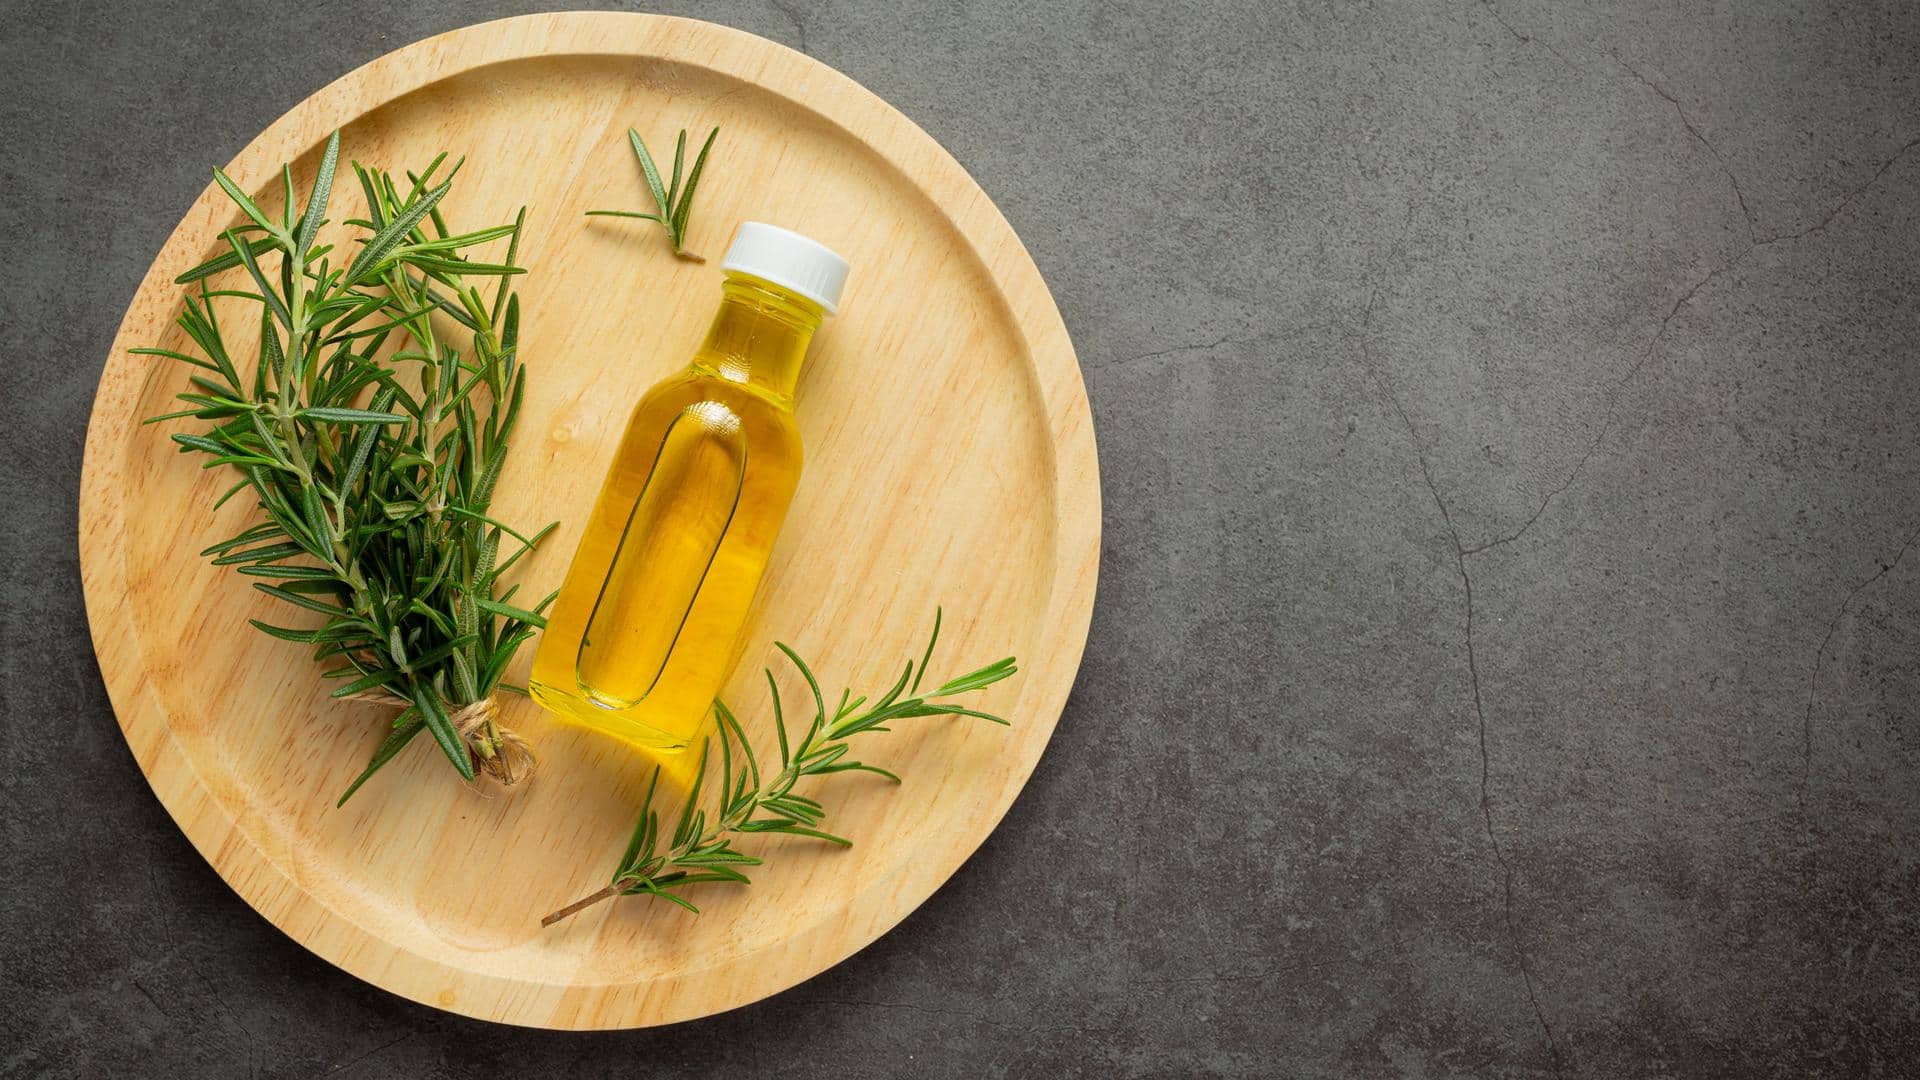 Oregano oil: Here's why it is so healthy